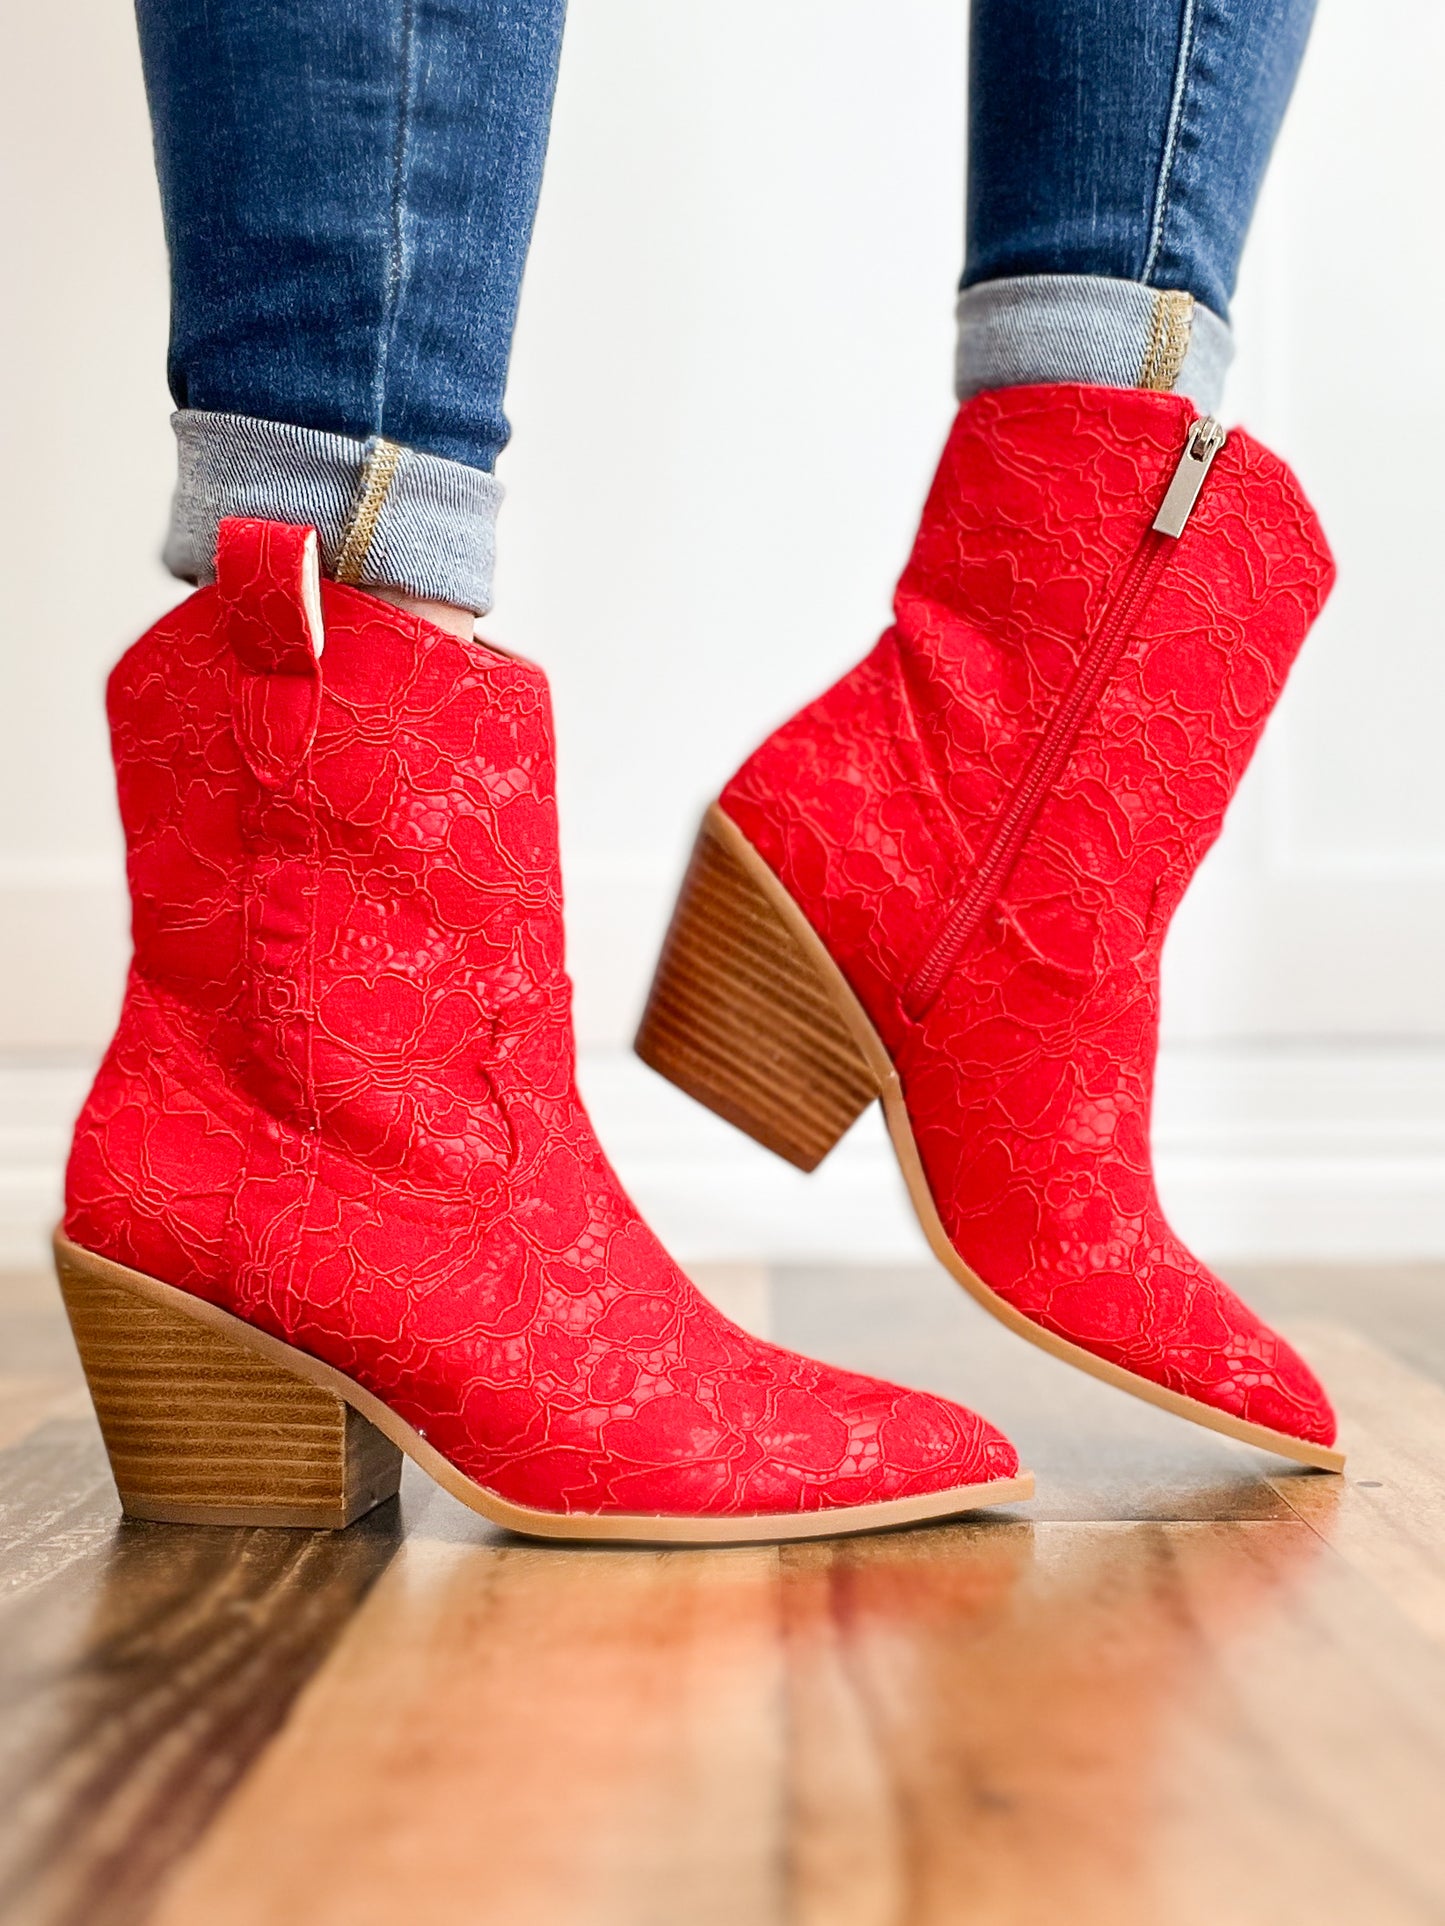 Corkys Rowdy Booties in Red Lace * FINAL SALE